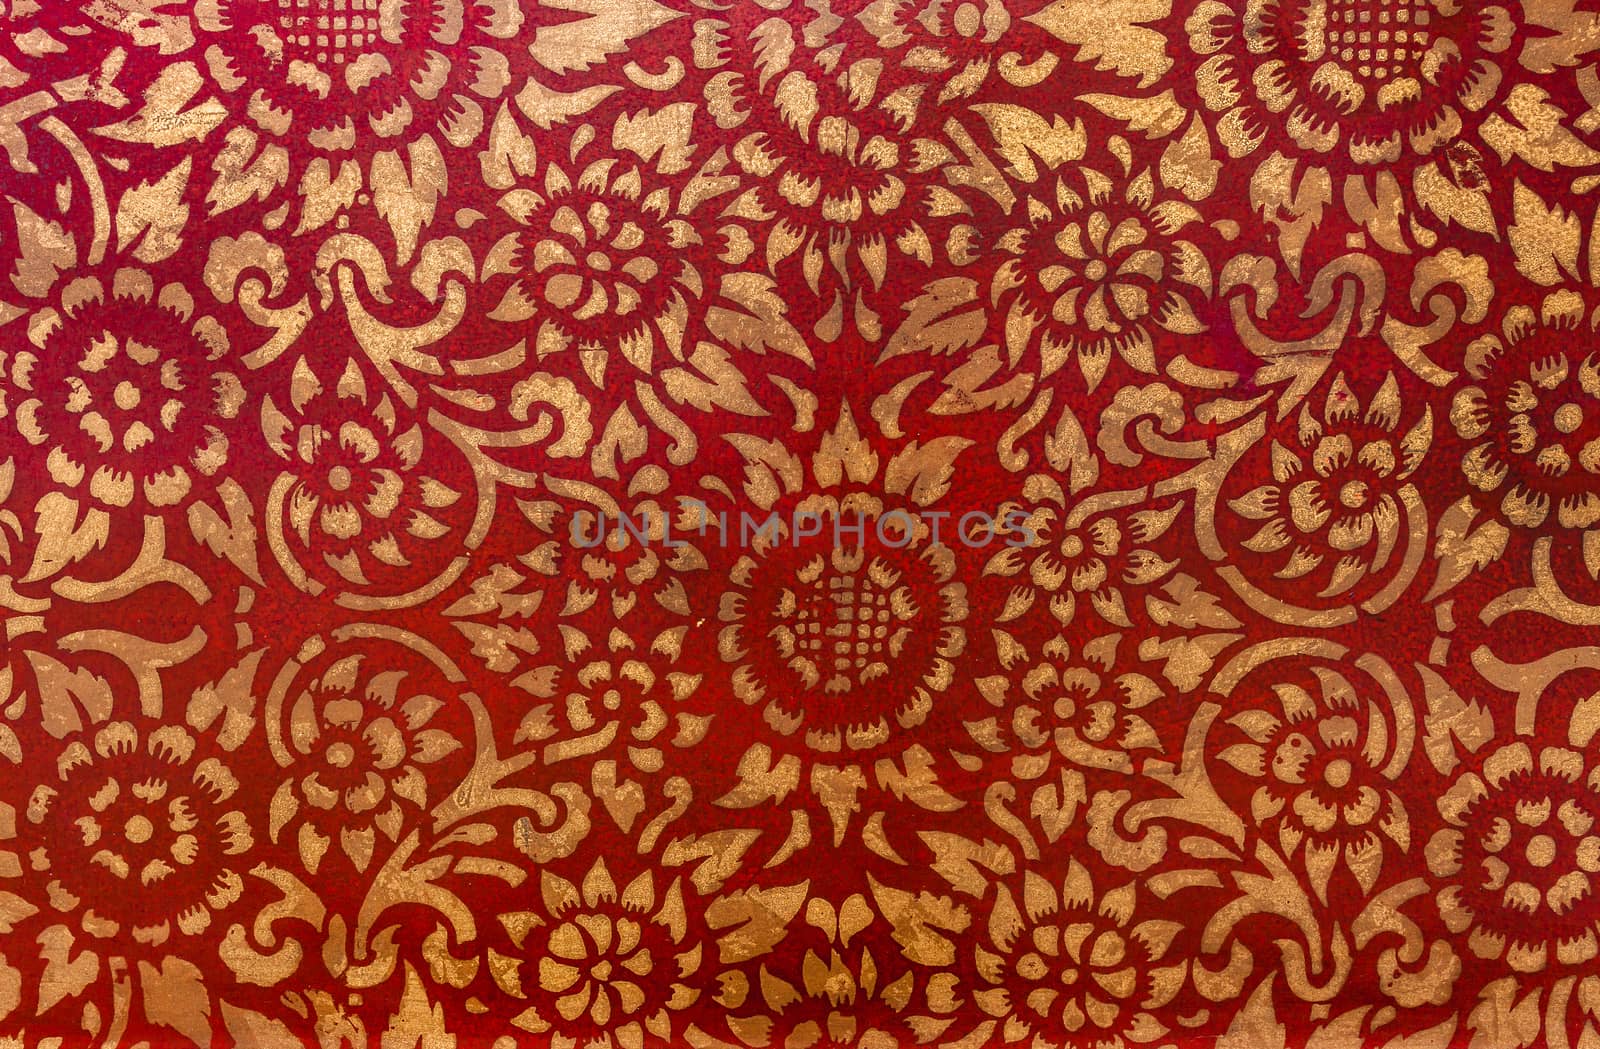 The gold leaf on wood for the background and textures. Thai style pattern on red wall .